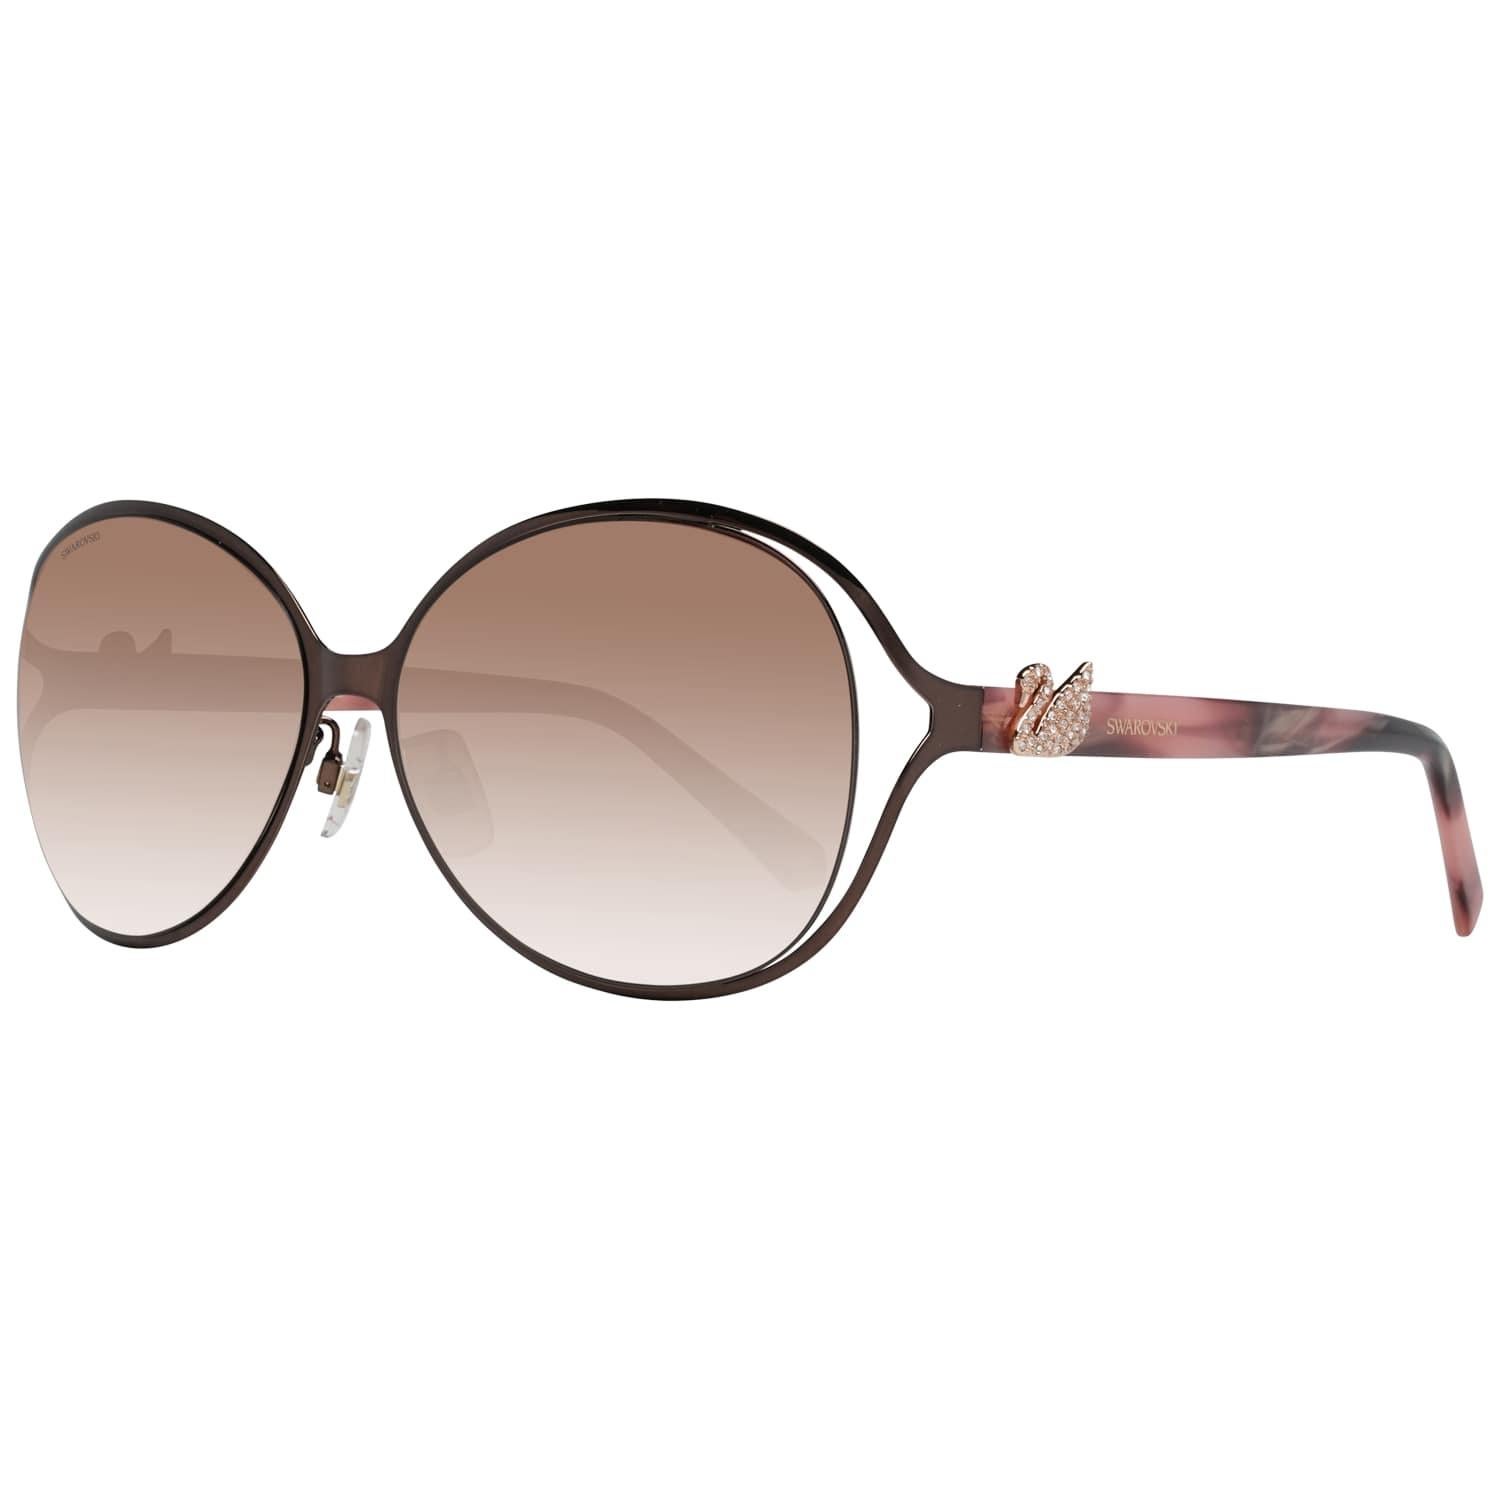 DetailsMATERIAL: MetalCOLOR: BrownMODEL: SK0241-K 6045FGENDER: WomenCOUNTRY OF MANUFACTURE: ChinaTYPE: SunglassesORIGINAL CASE?: YesSTYLE: OvalOCCASION: CasualFEATURES: LightweightLENS COLOR: BrownLENS TECHNOLOGY: GradientYEAR MANUFACTURED: